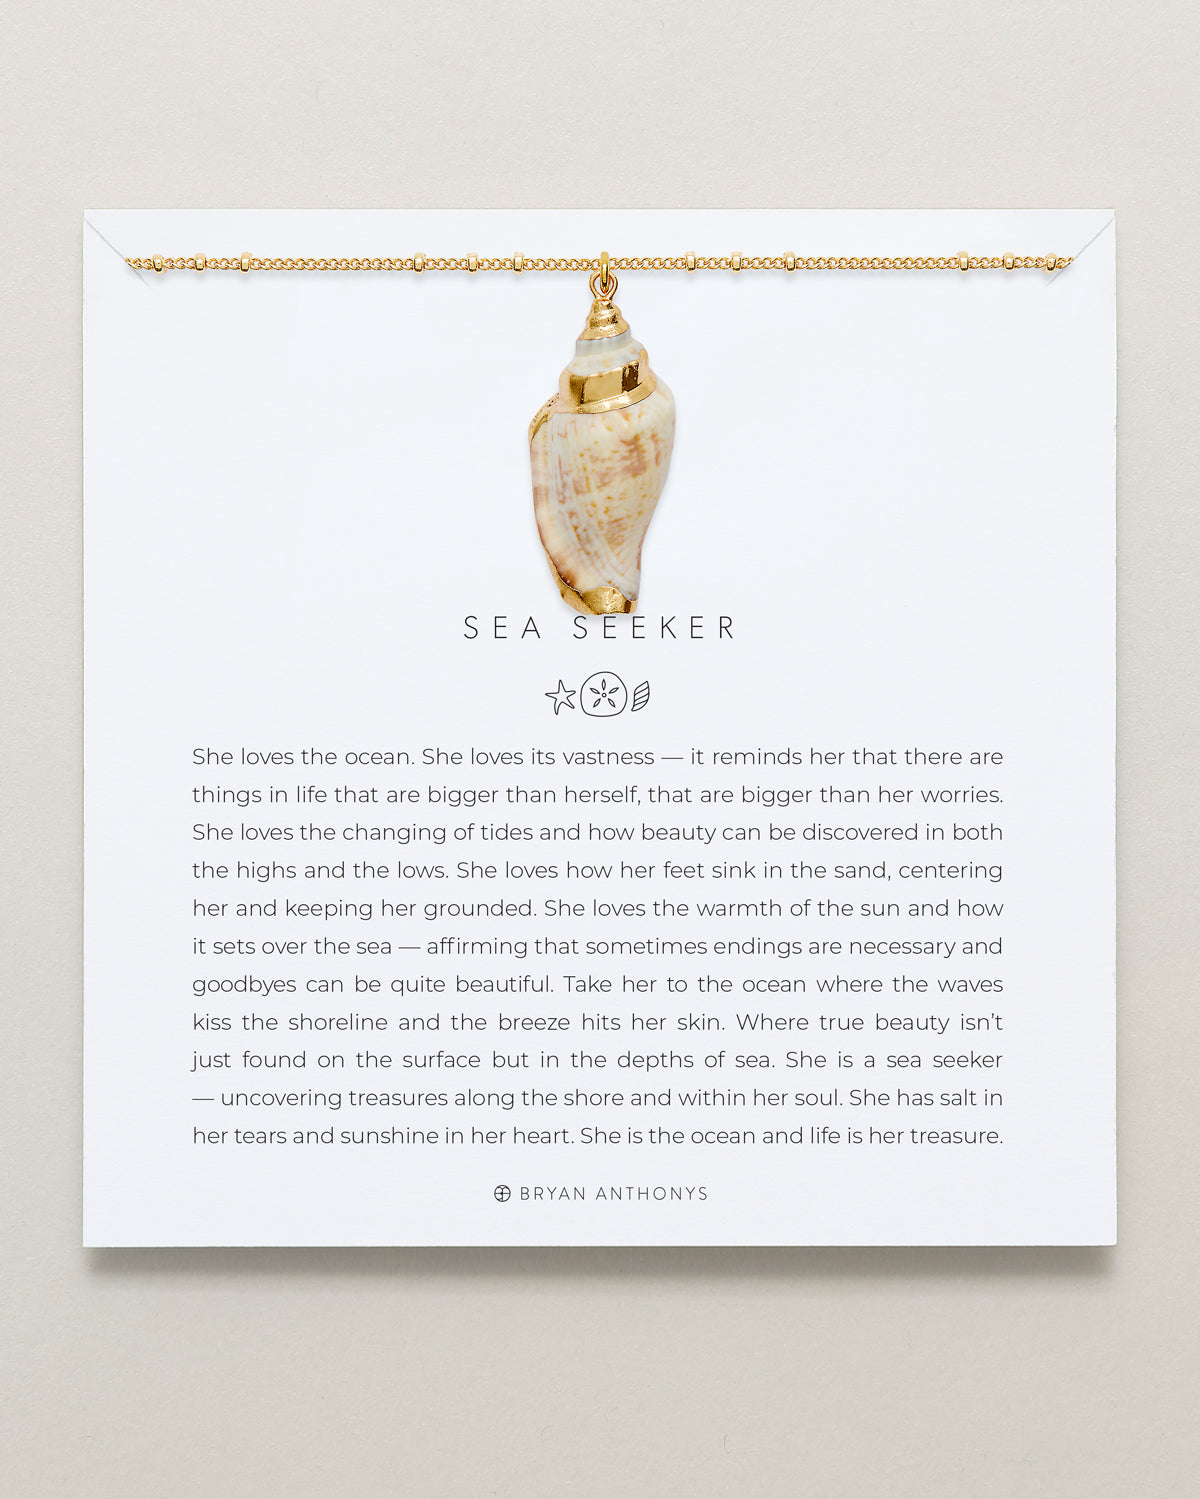 Bryan Anthonys Gold Sea Seeker Pendant Necklace On Card